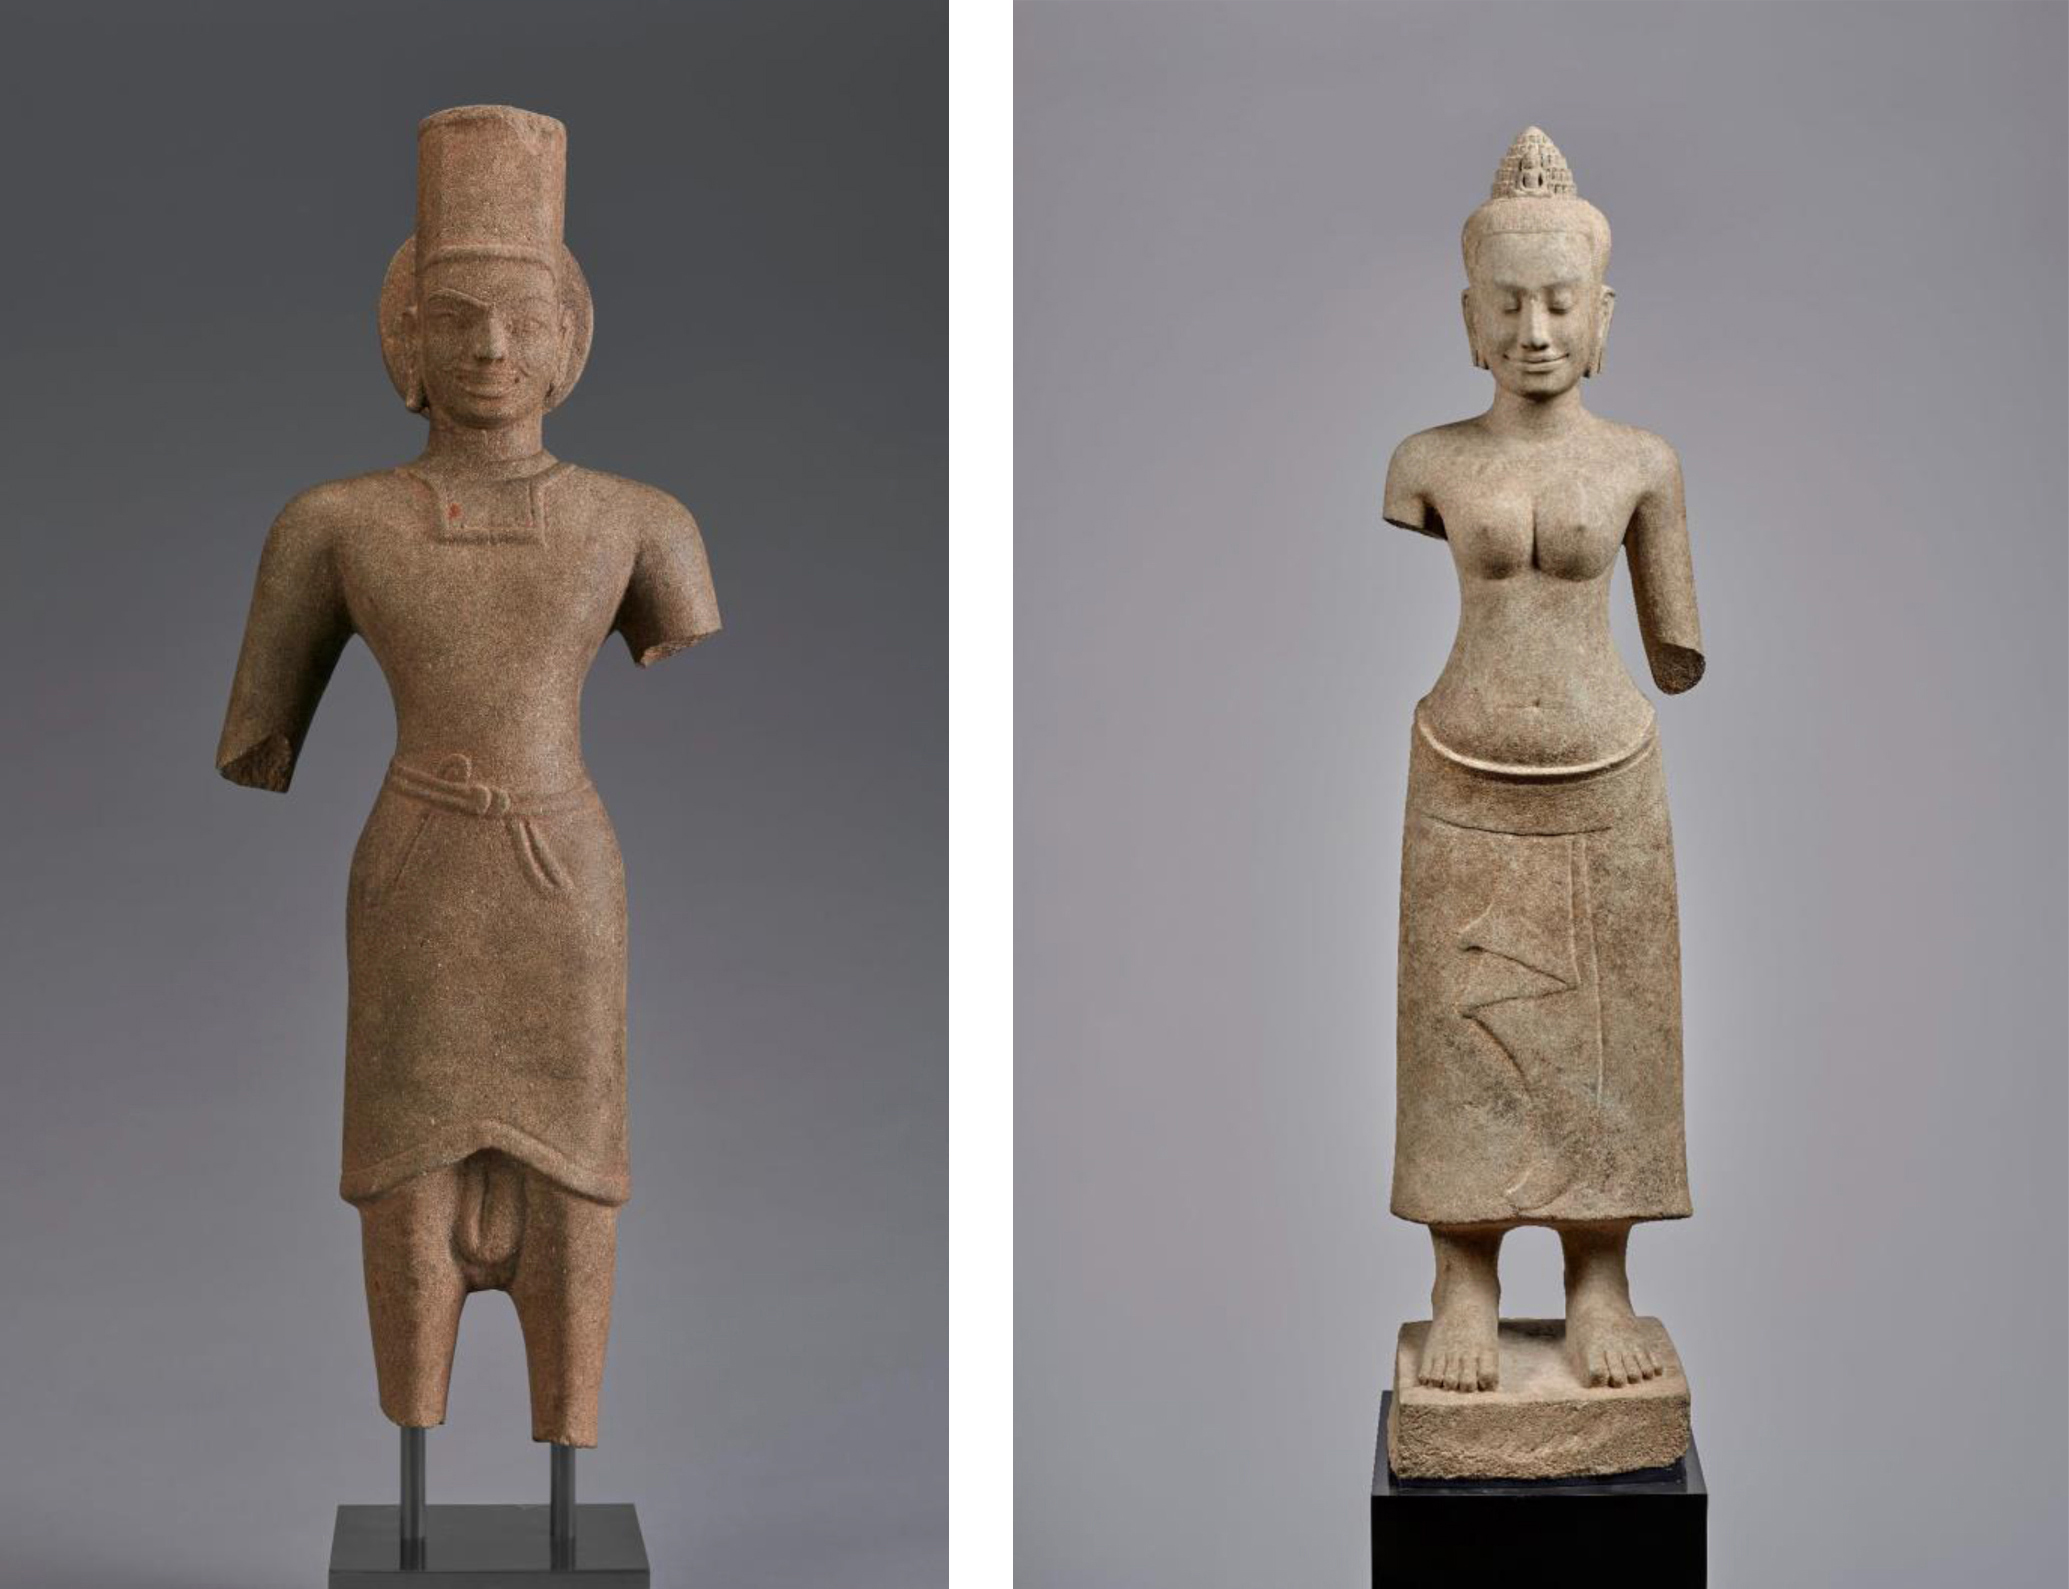 LEFT: A 7th to 8th century Khmer sandstone sculpture depicting standing Surya, the sun god is pictured. RIGHT: A late 12th century Khmer sandstone sculpture depicting standing Prajnaparamita, the goddess of transcendent wisdom is pictured. The U.S. Department of Justice sought the forfeiture of both sculptures to return to Cambodia, alleging they were stolen and sold to the Denver Art Museum. (Images provided by U.S. Department of Justice)